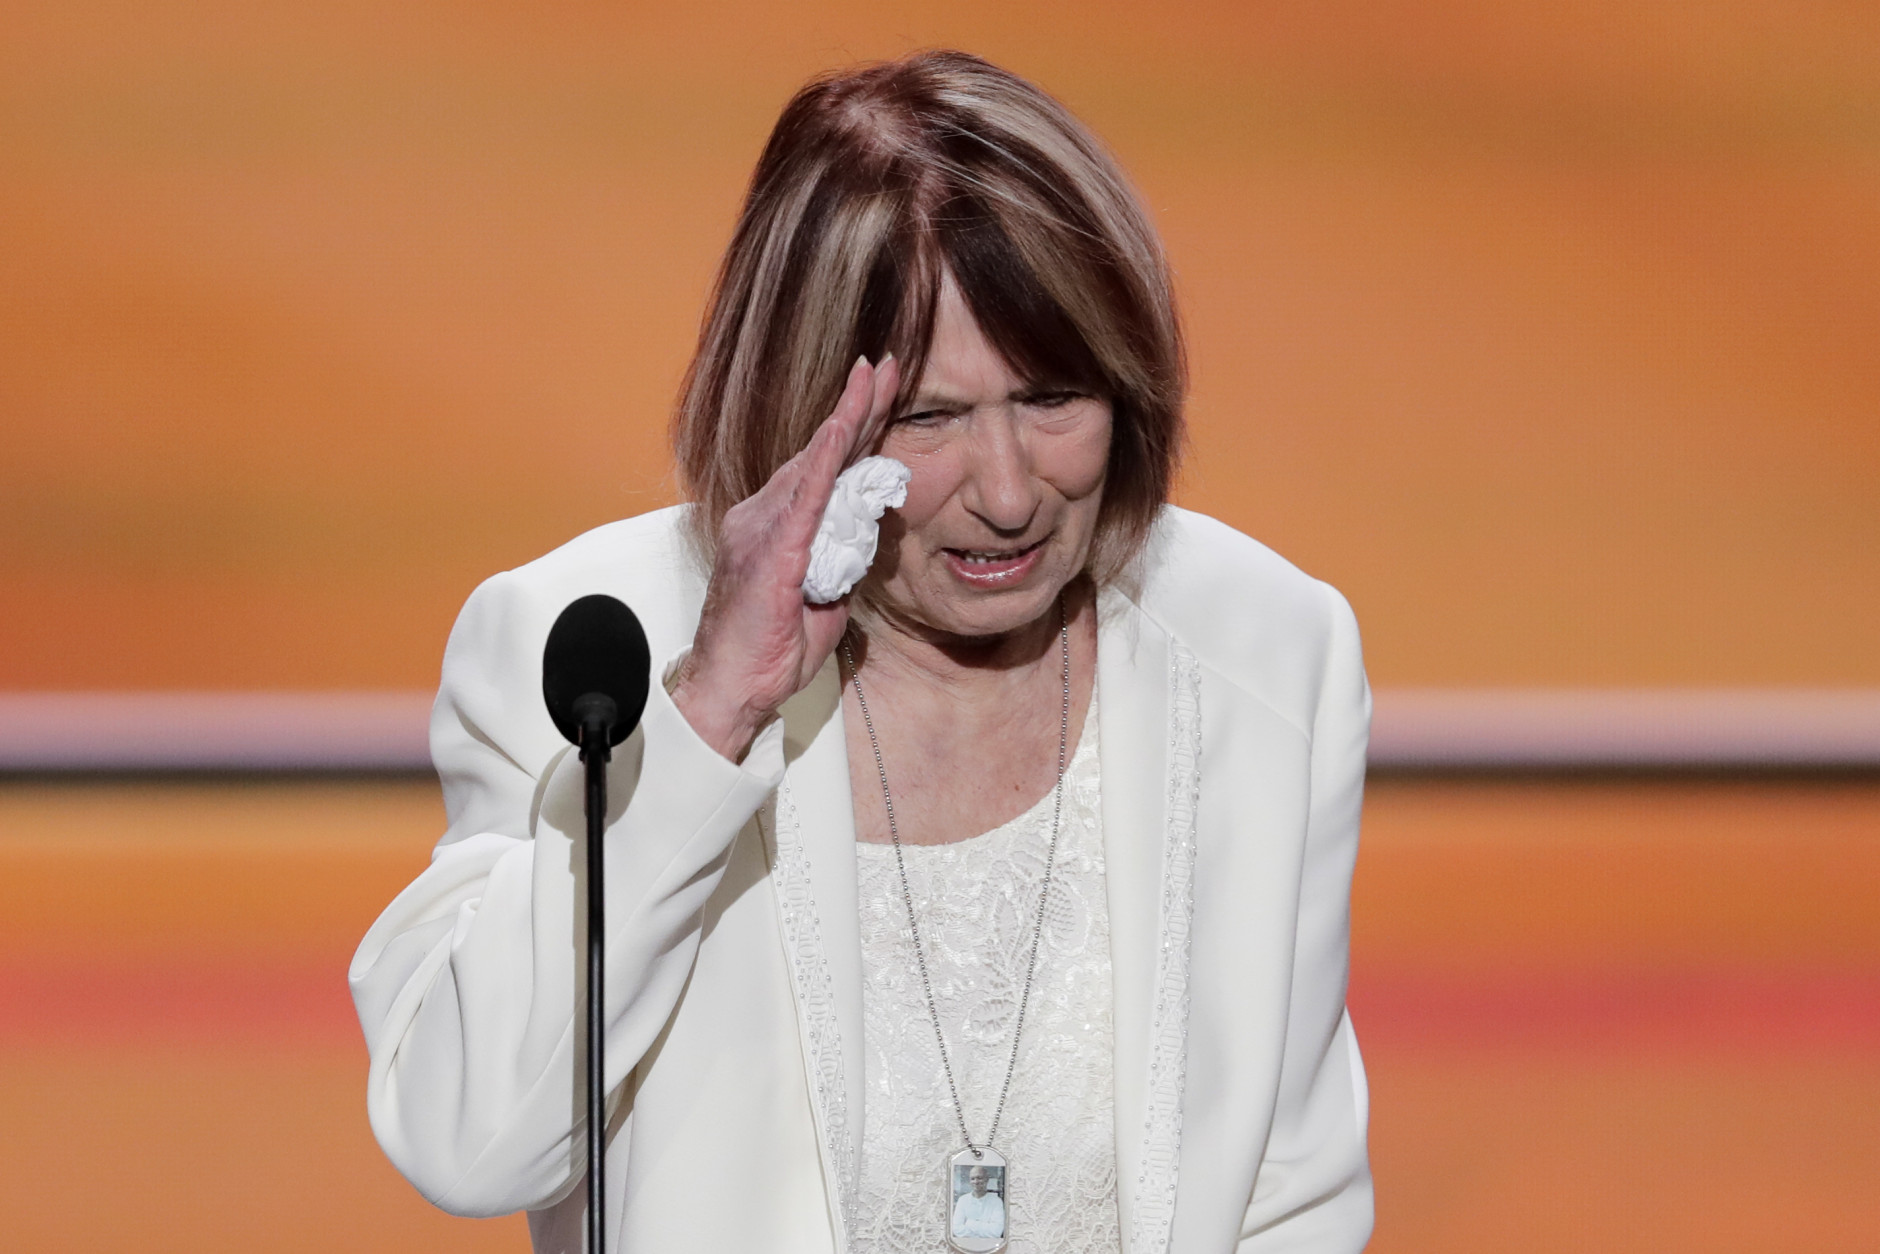 Pat Smith, mother of Benghazi victim Sean Smith, salutes after speaking during the opening day of the Republican National Convention in Cleveland, Monday, July 18, 2016. (AP Photo/J. Scott Applewhite)